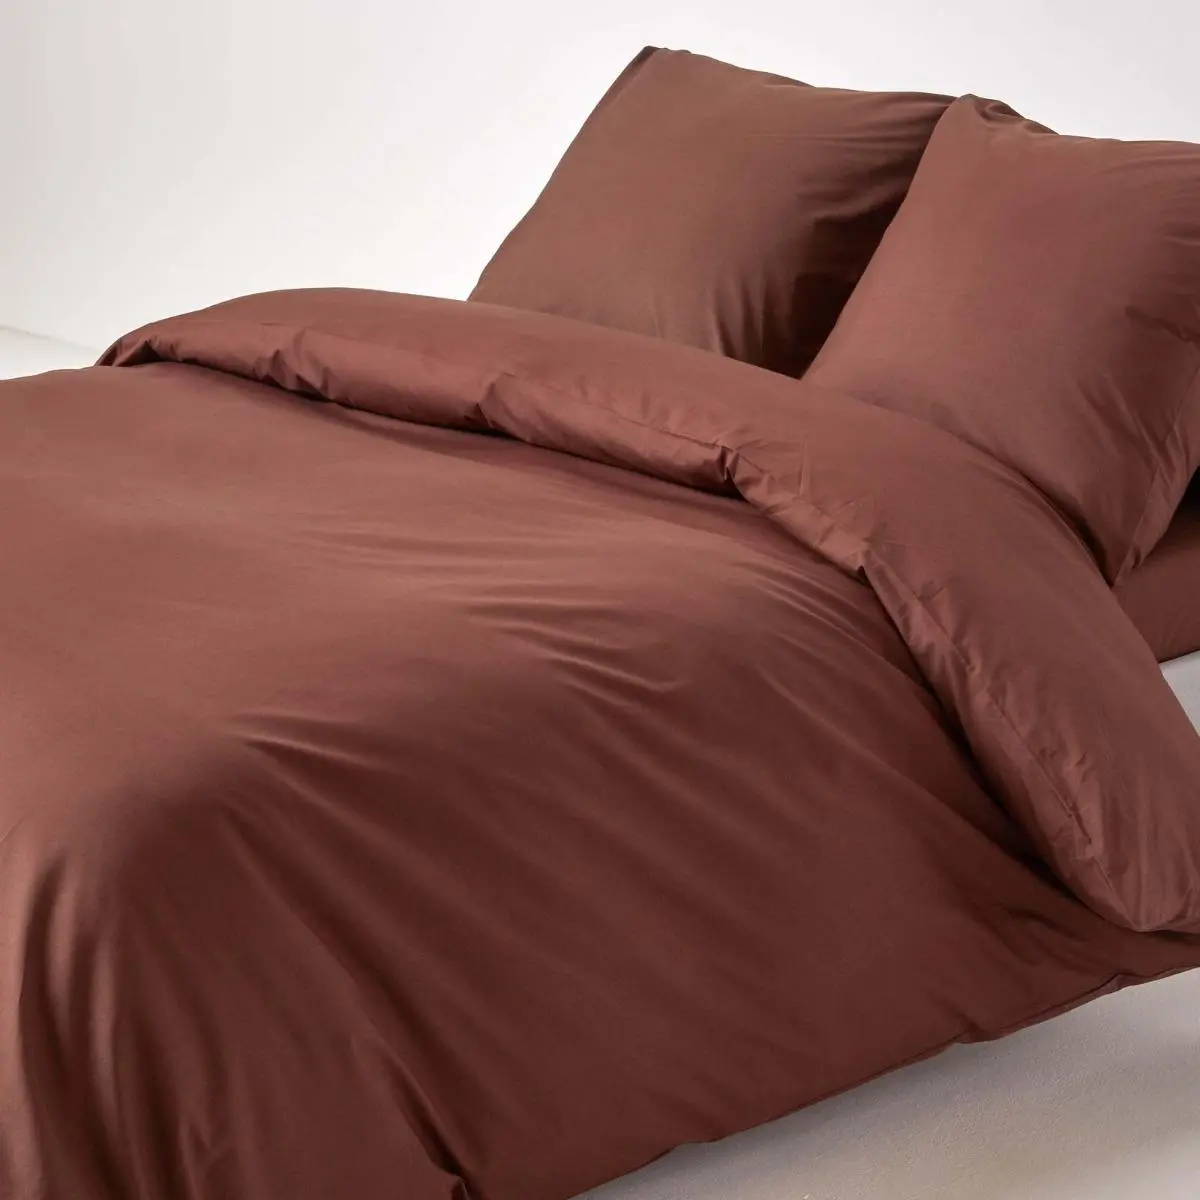 Chocolate Continental Egyptian Cotton, Chocolate Duvet Cover Set